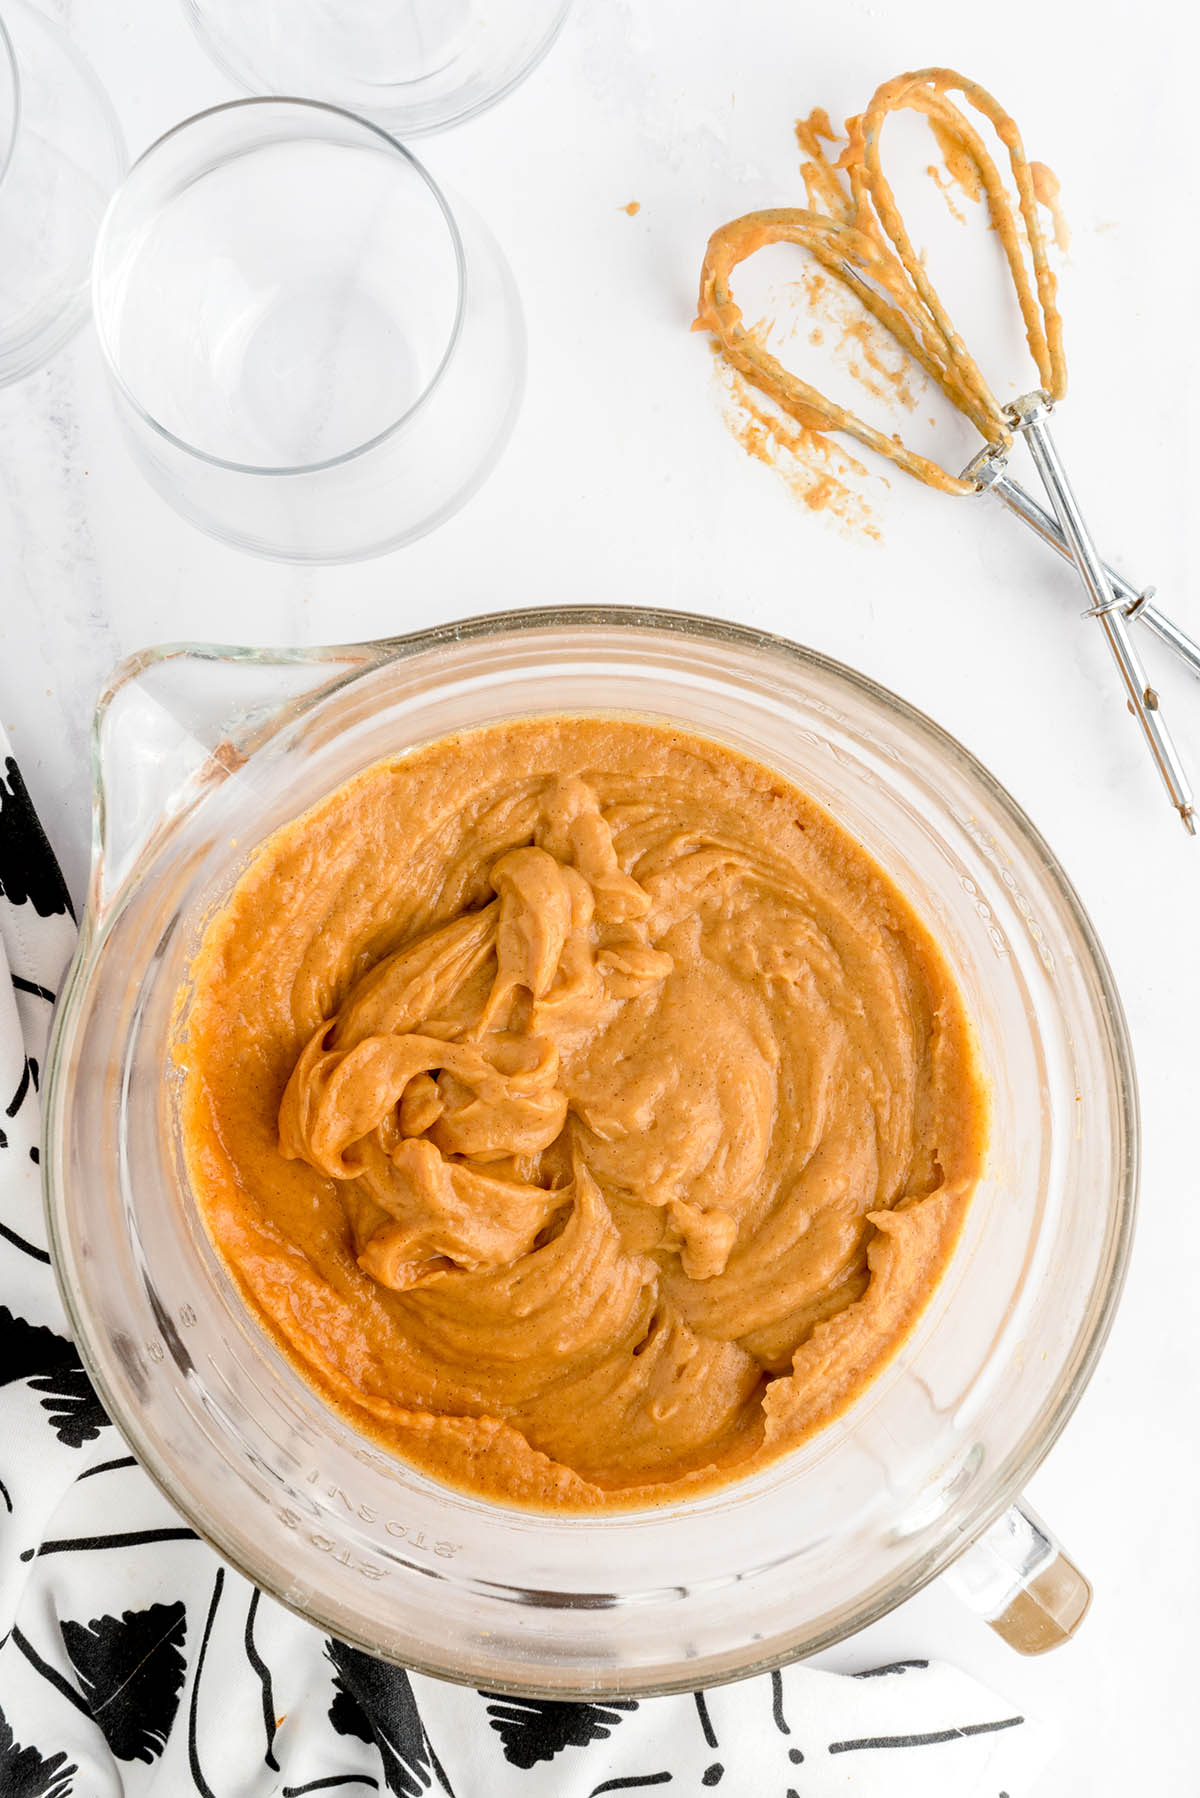 Beat together pumpkin puree, evaporated milk, pumpkin spice and instant pudding